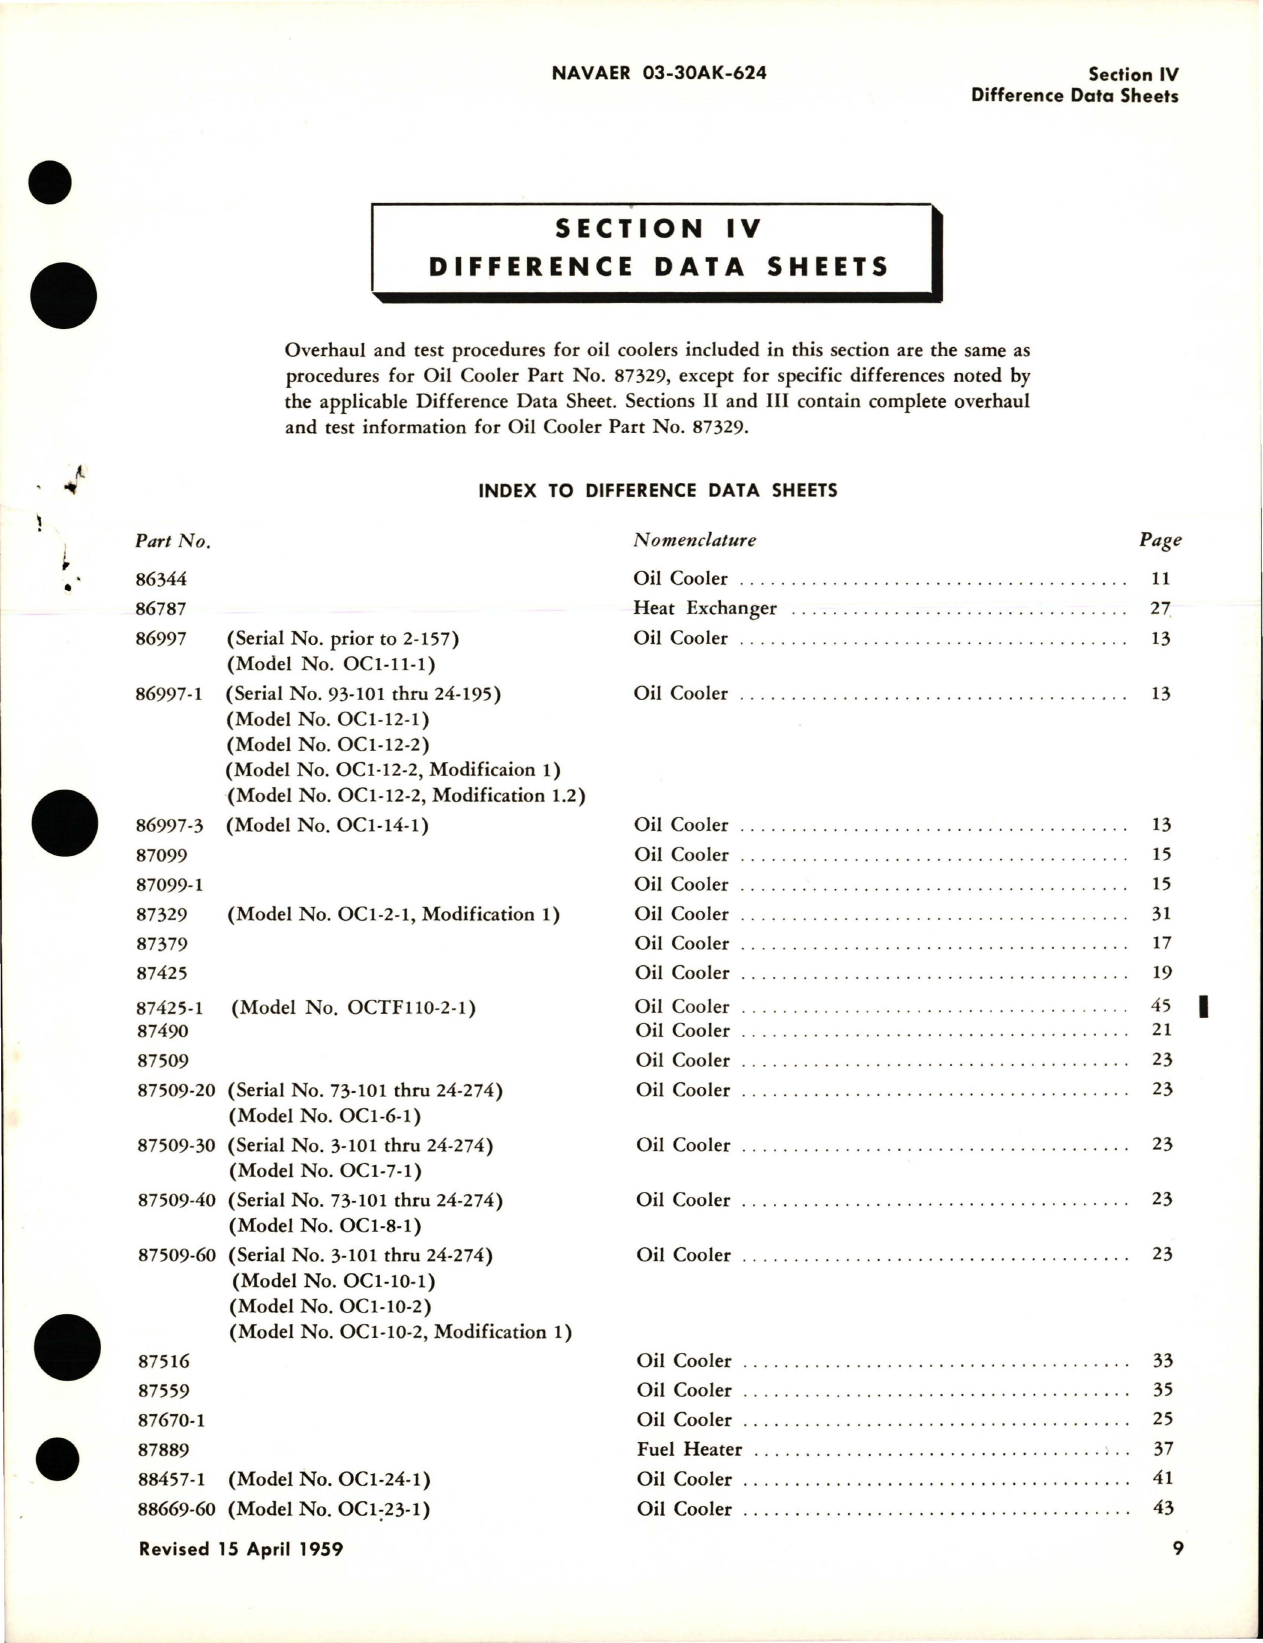 Sample page 5 from AirCorps Library document: Overhaul Instructions for Oil Coolers, Heat Exchanger, and Fuel Heater